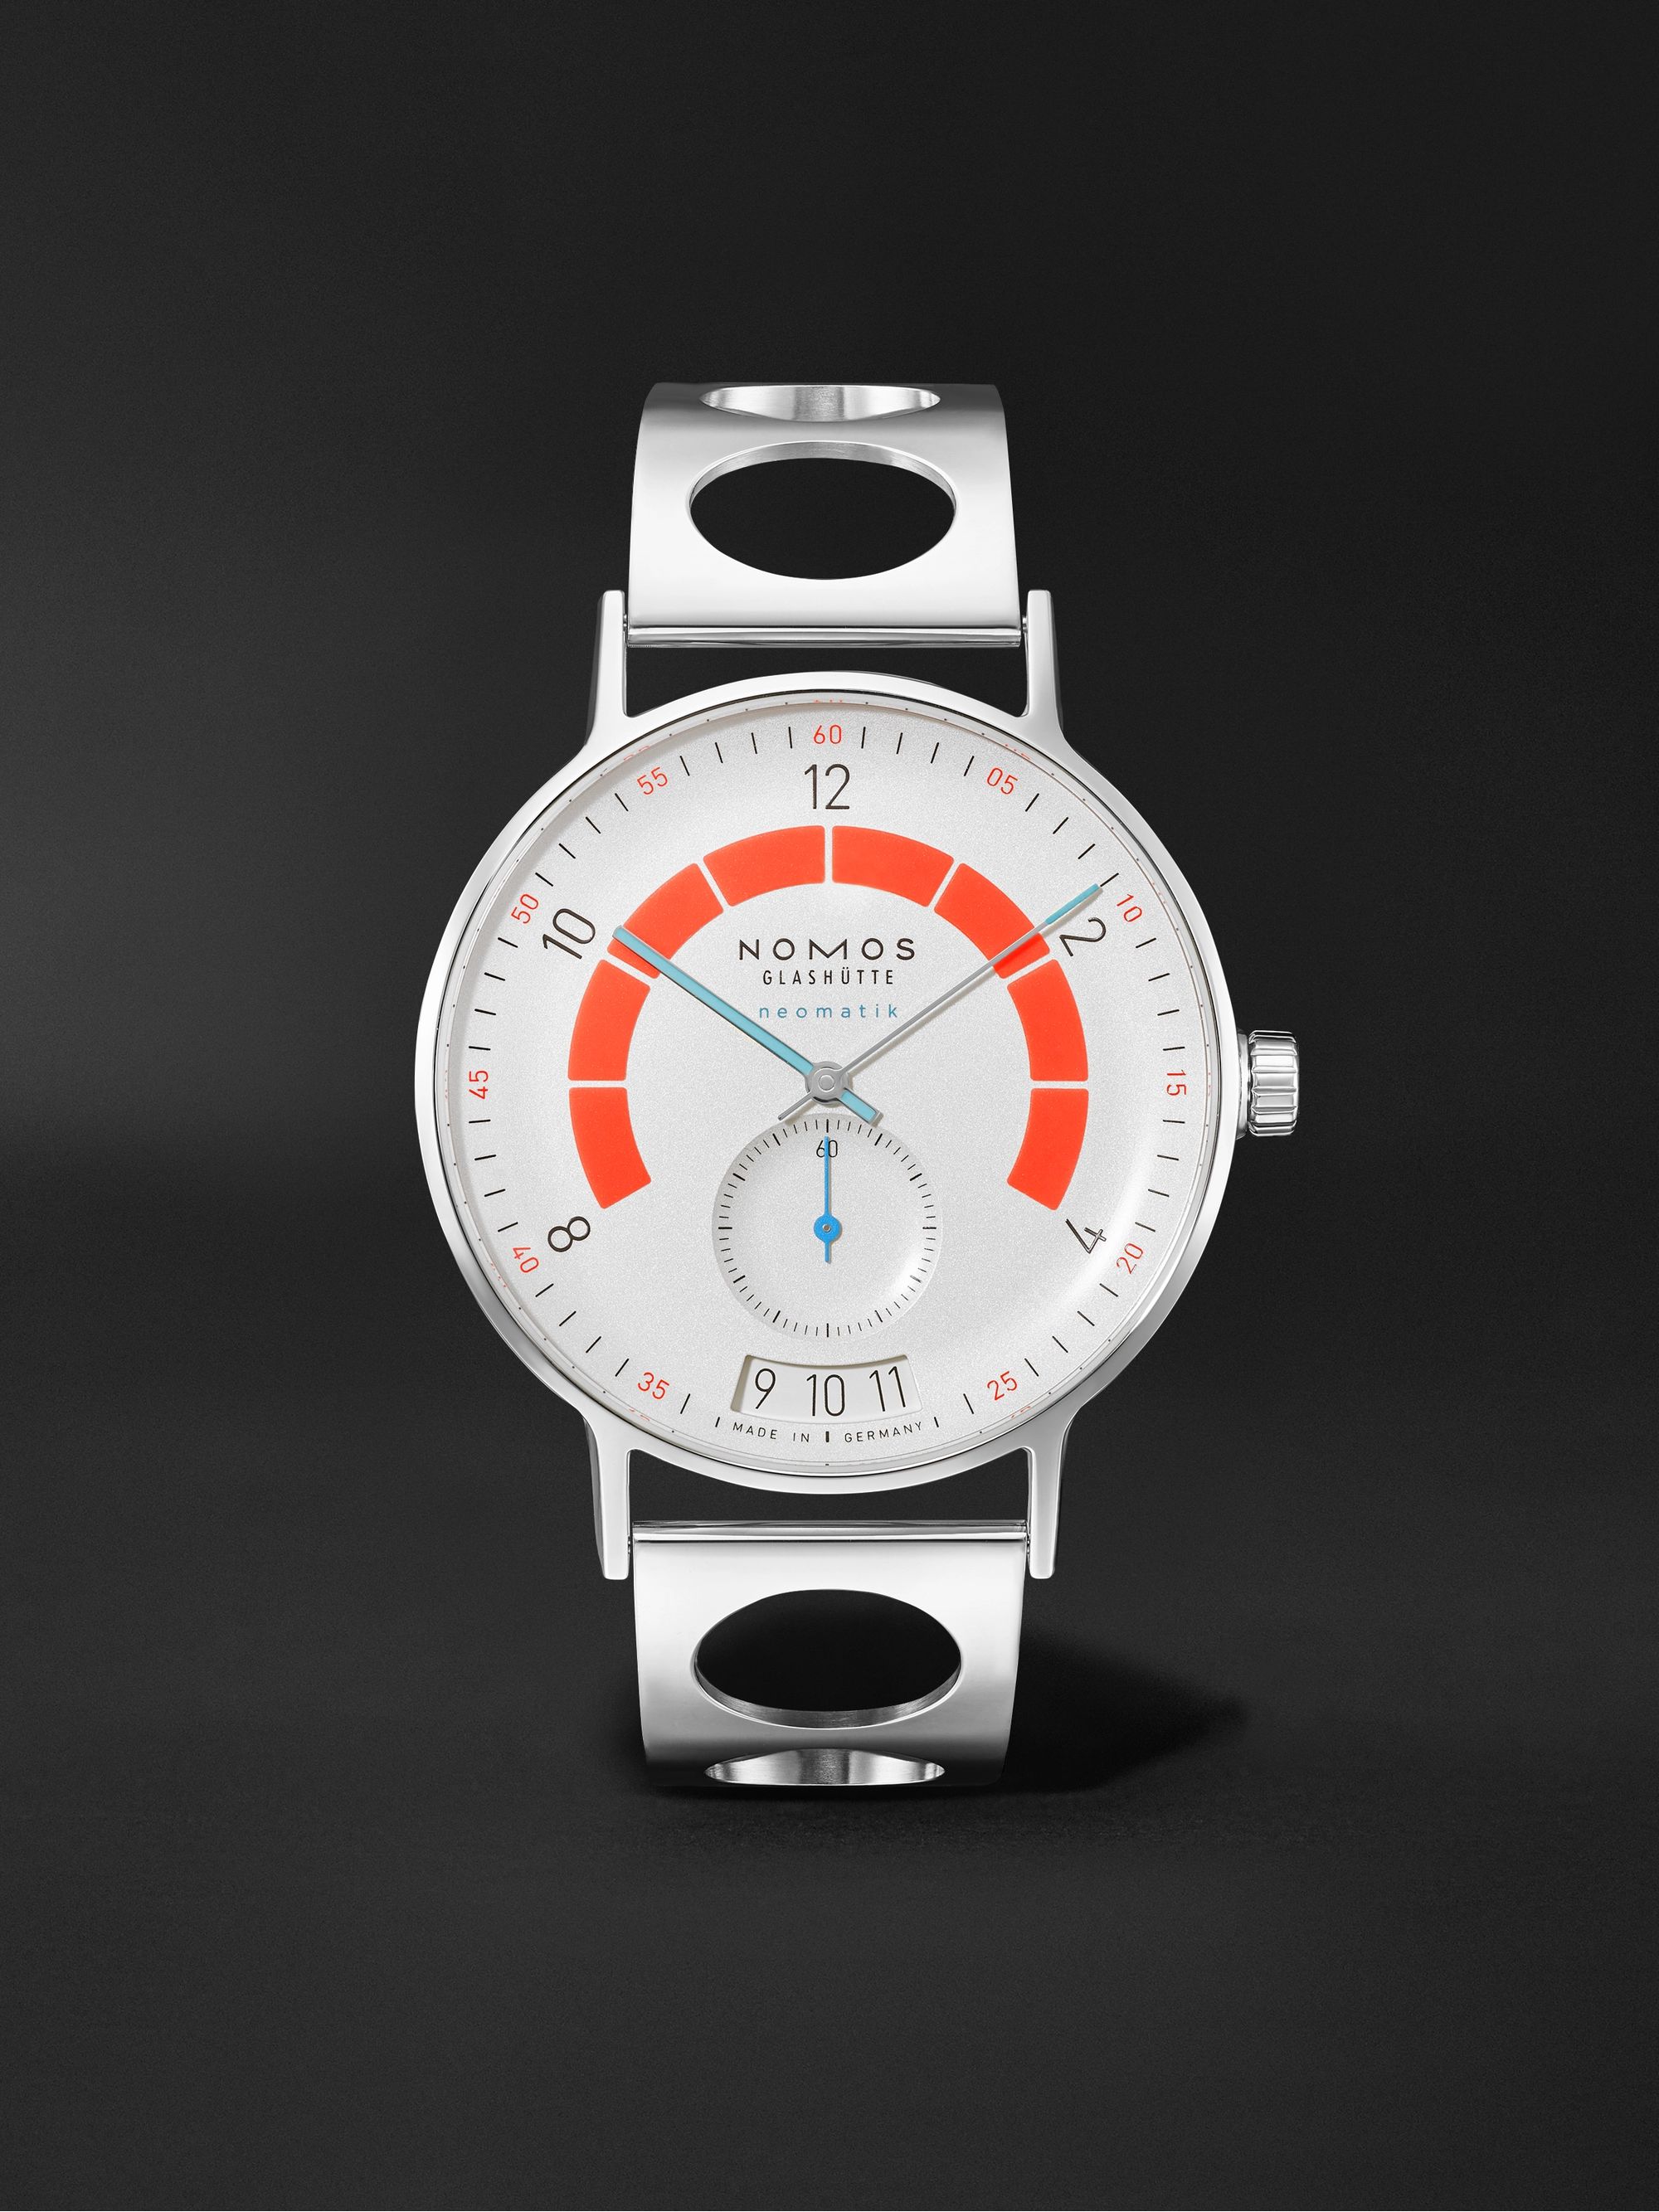 NOMOS GLASHÜTTE Autobahn Director's Cut A3 Limited Edition Automatic 41mm Stainless Steel Watch, Ref. No. 1301.S1